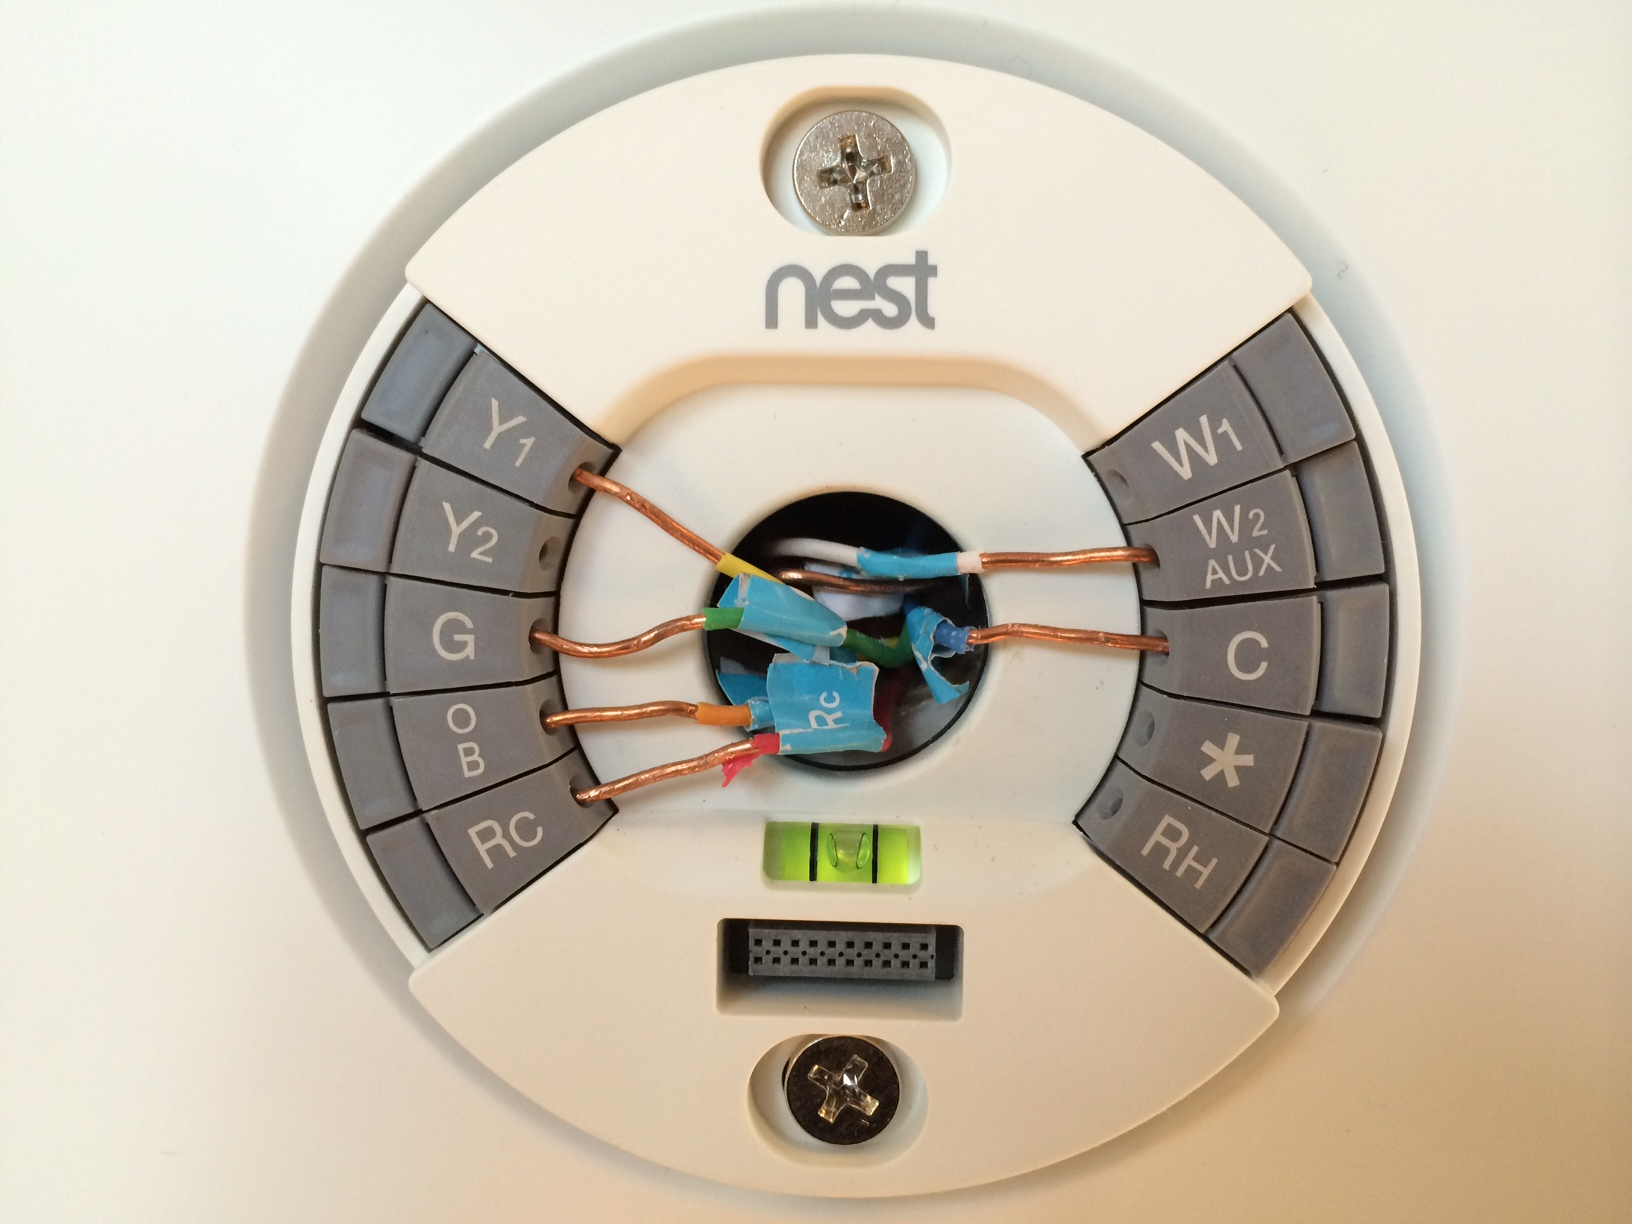 Nest Thermostat Wiring Diagram For Furnace And Air Conditioning - Nest Thermostat Wiring Diagram Heat Pump